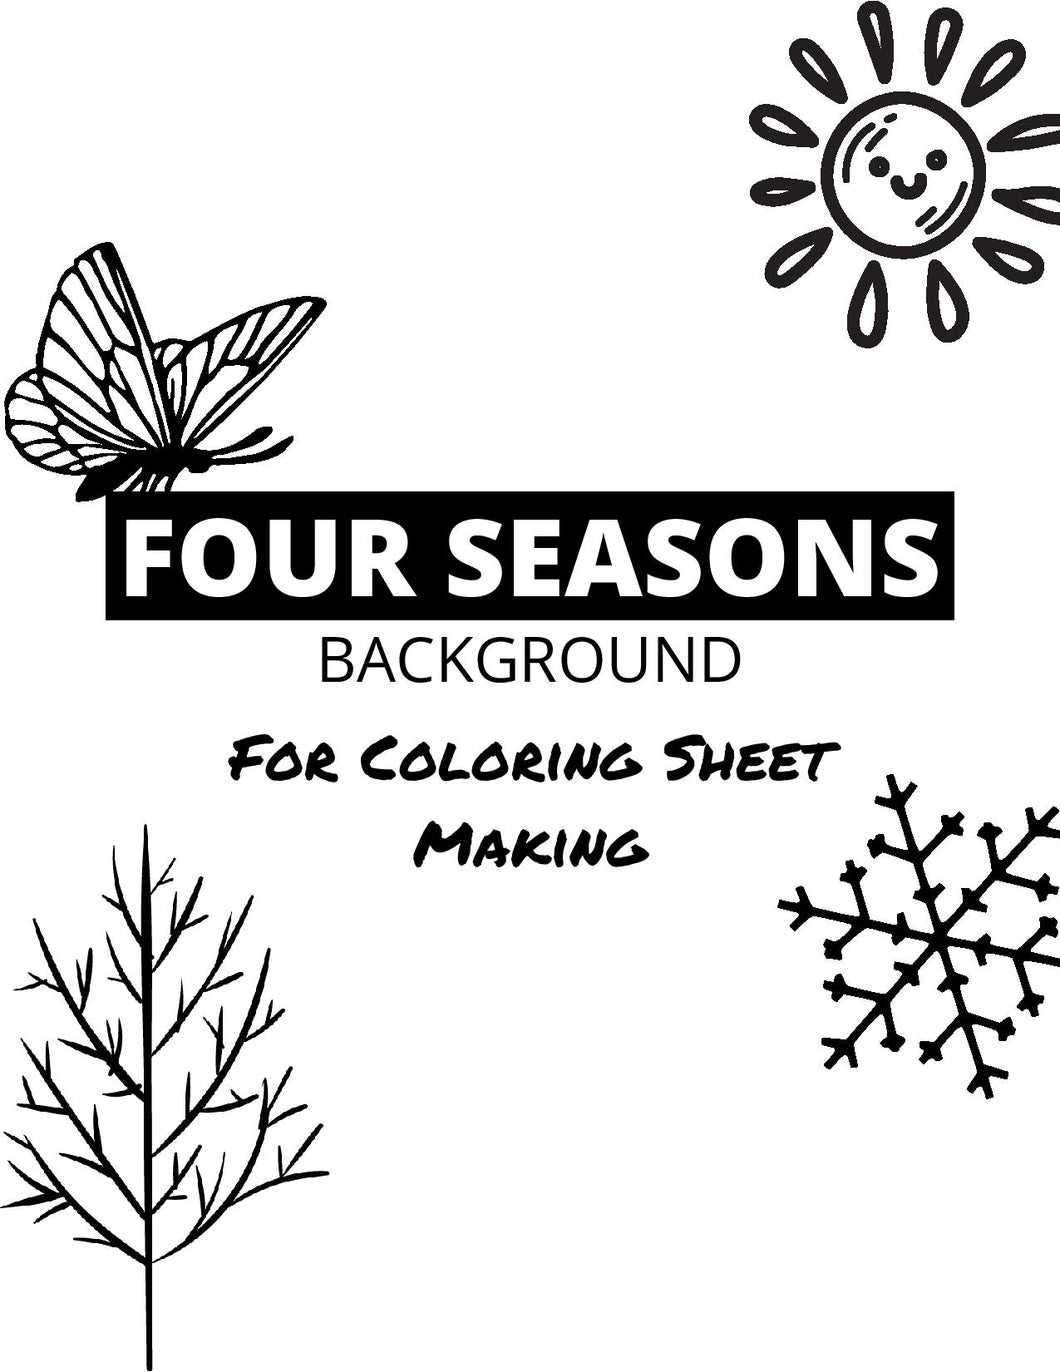 Four Seasons Background for Coloring Sheets